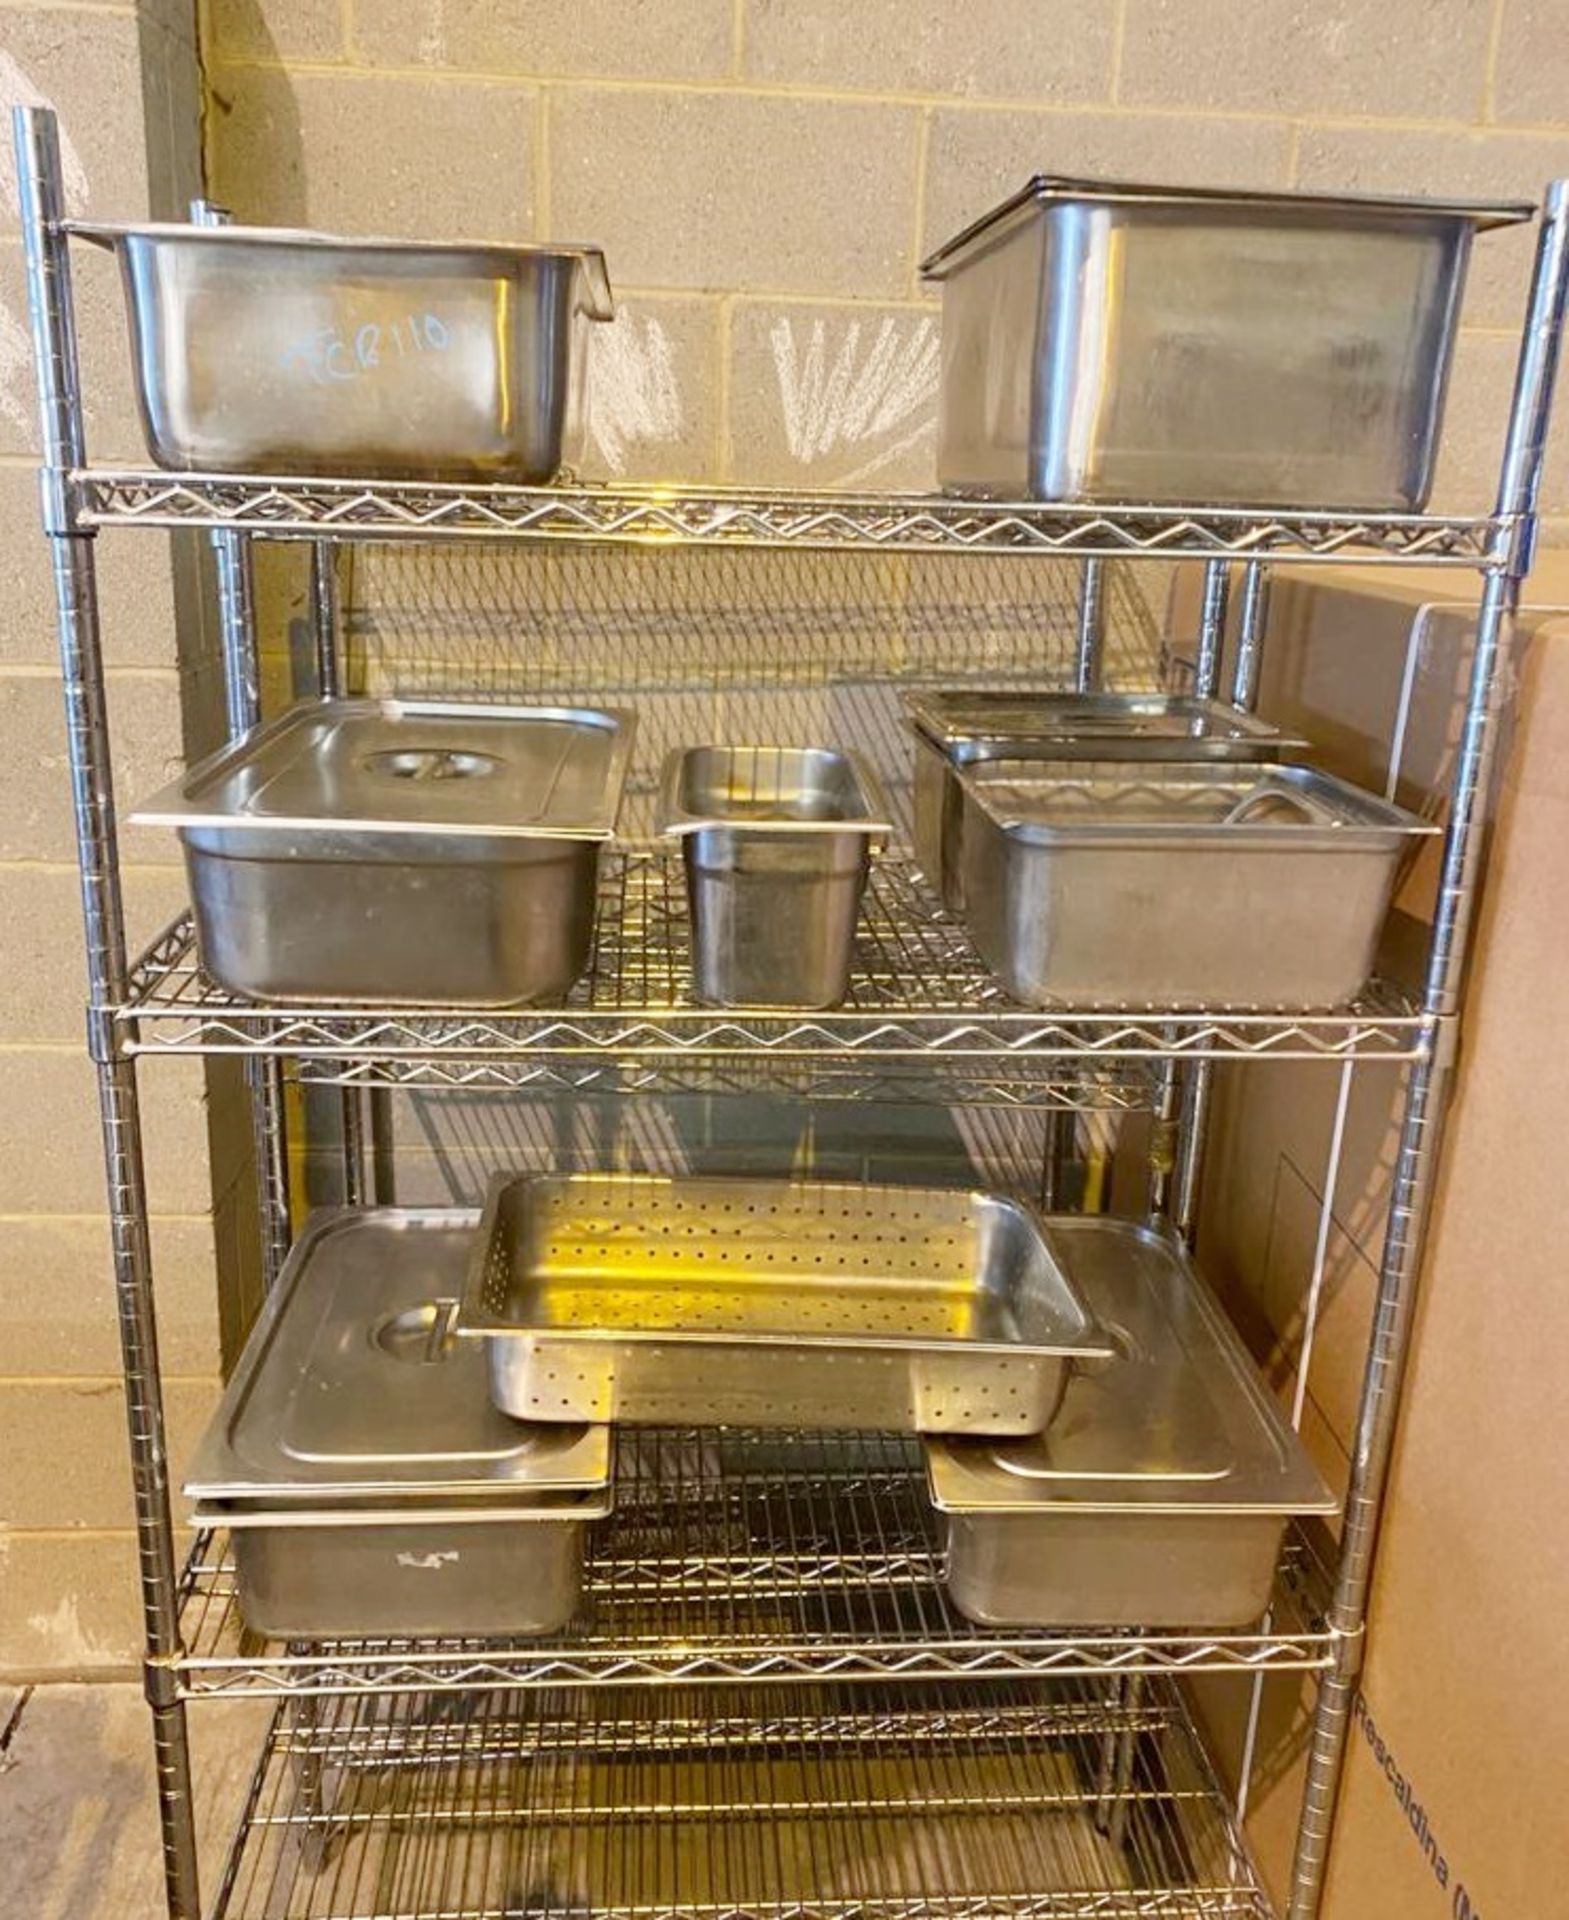 12 x Large Stainless Steel Gastro Pans - Includes Some Lids